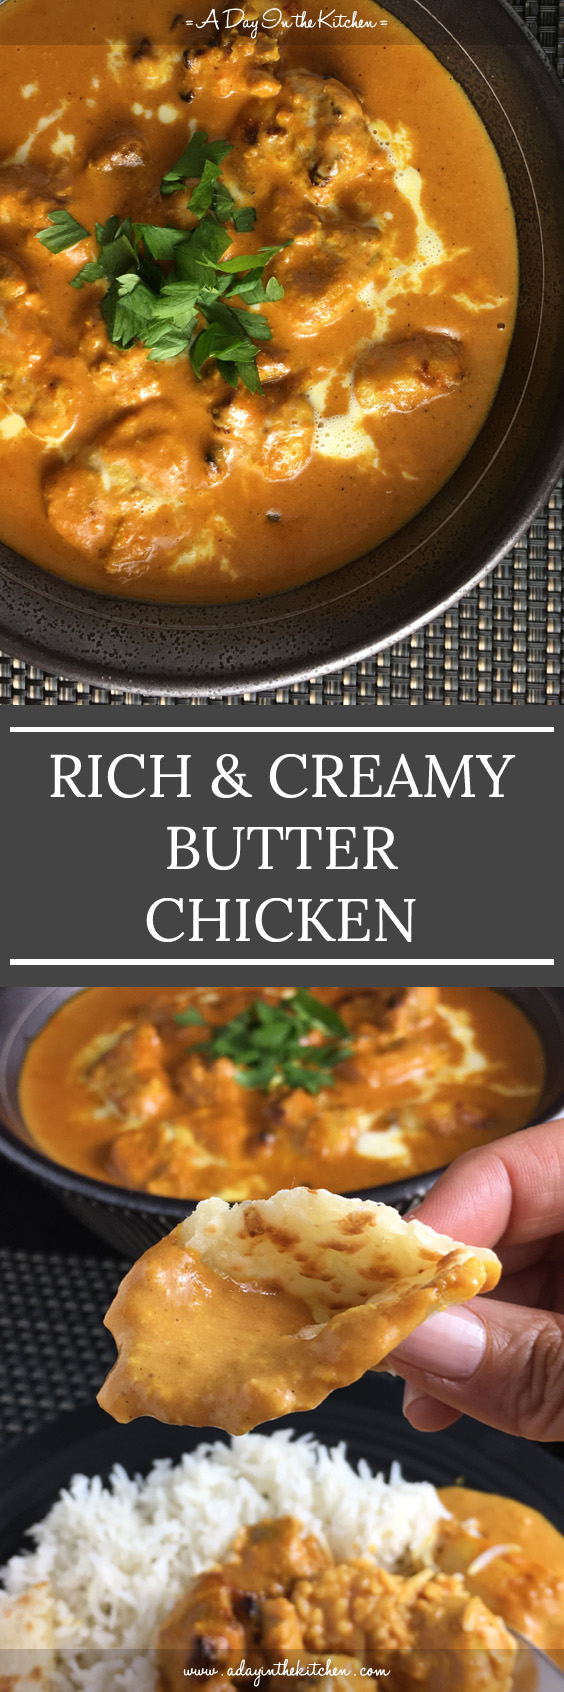 Rich and Creamy Butter Chicken | A DAY IN THE KITCHEN